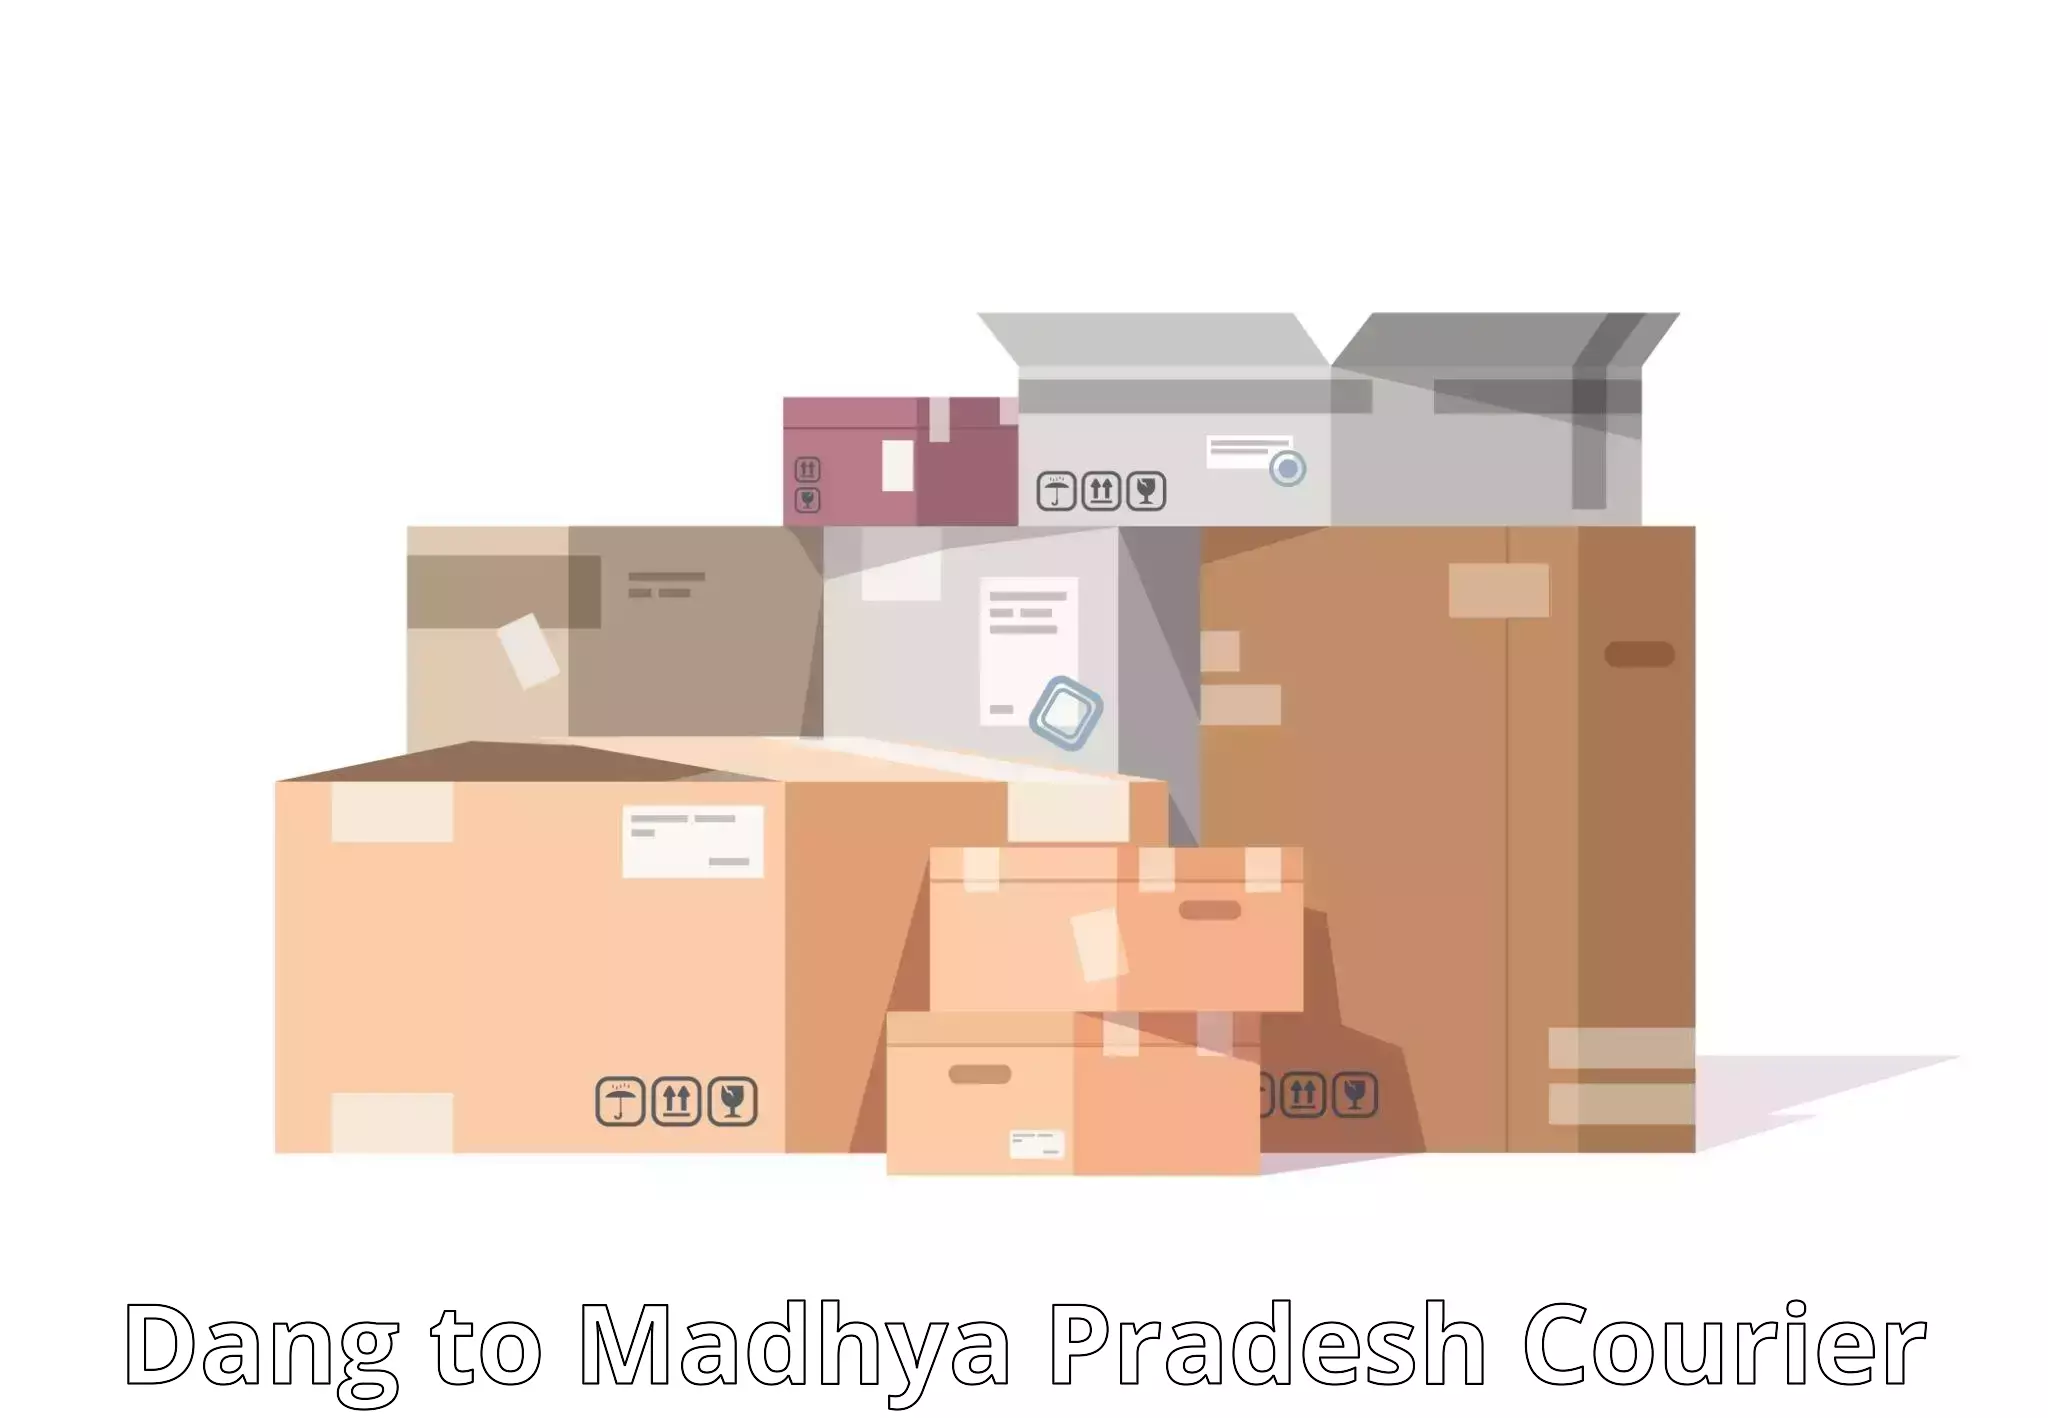 Package delivery network Dang to Madhya Pradesh